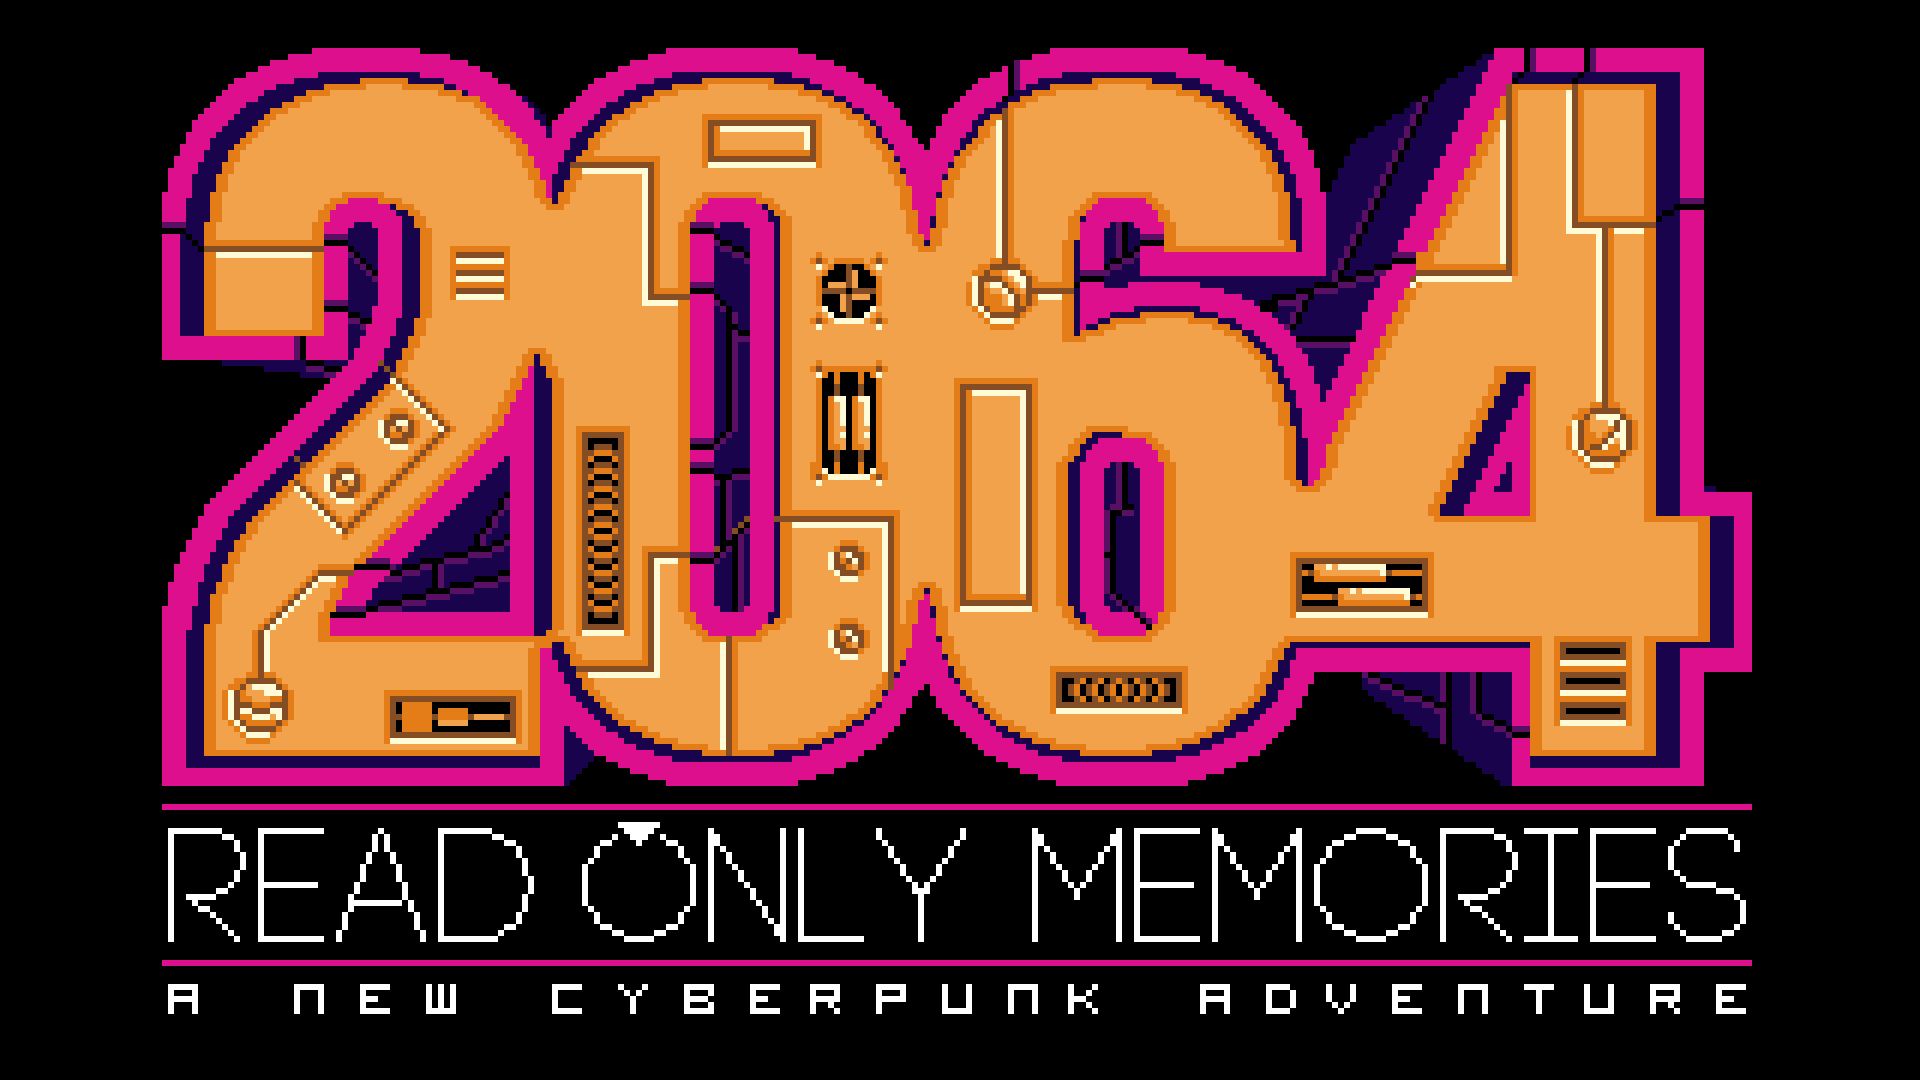 2064_ Read Only Memories_title